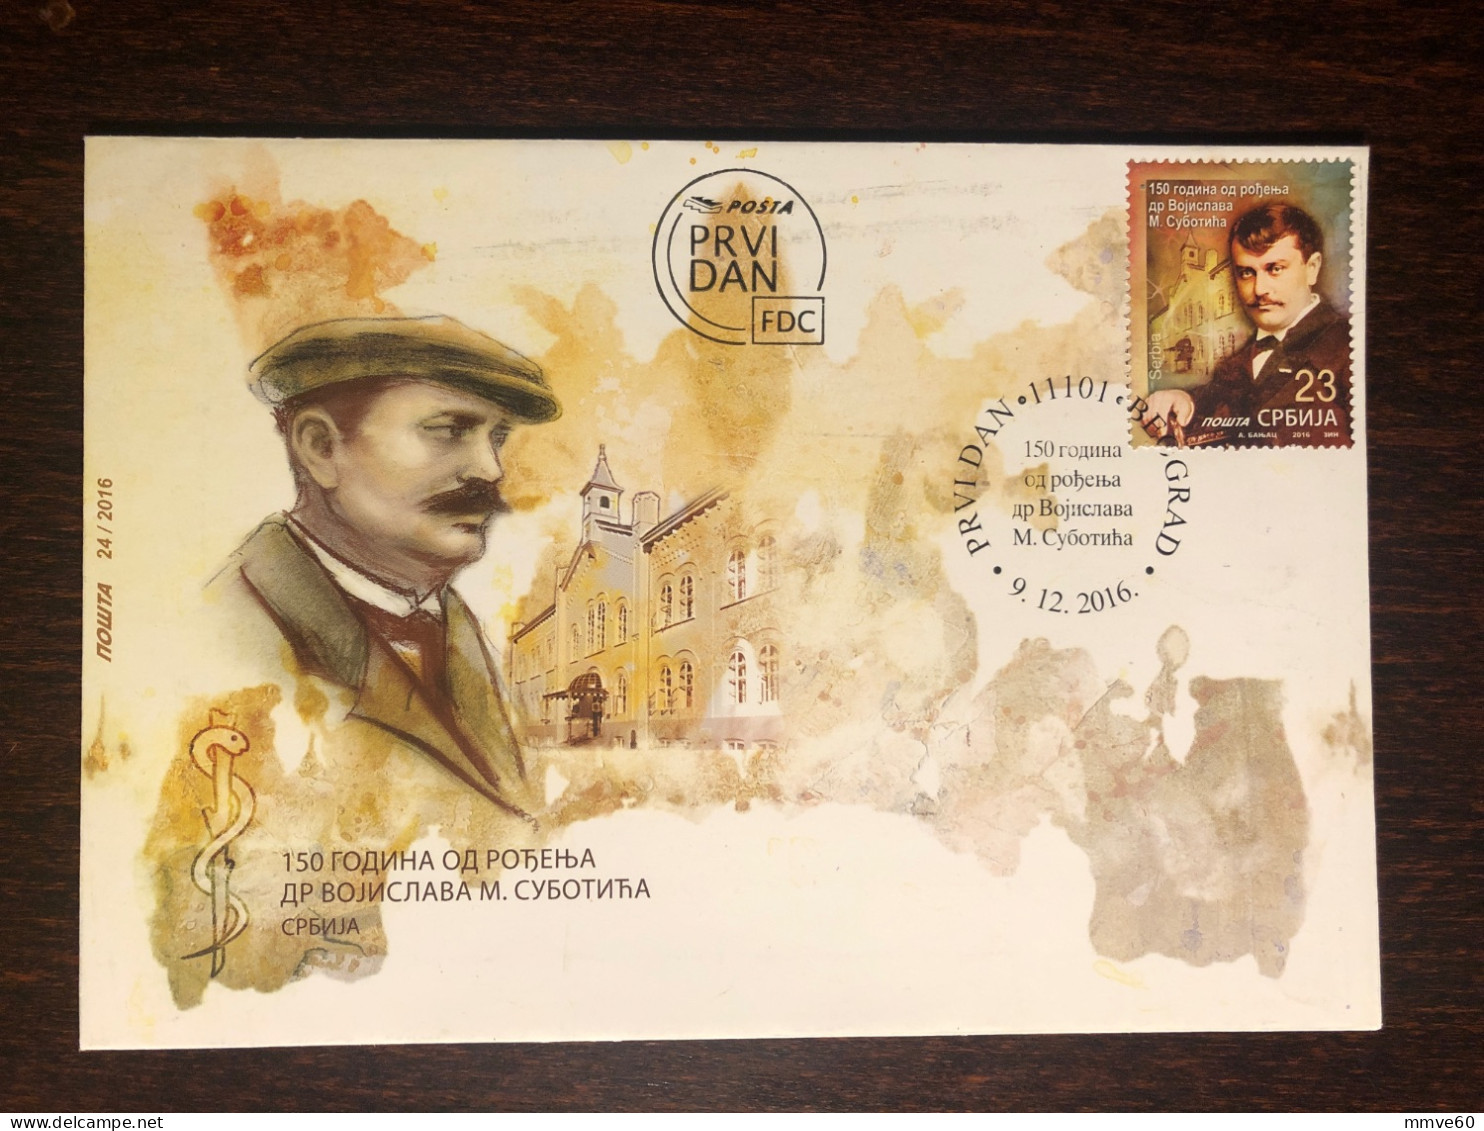 SERBIA FDC COVER 2016 YEAR DOCTOR SUBOTITSYA SURGERY HEALTH MEDICINE STAMPS - Serbie